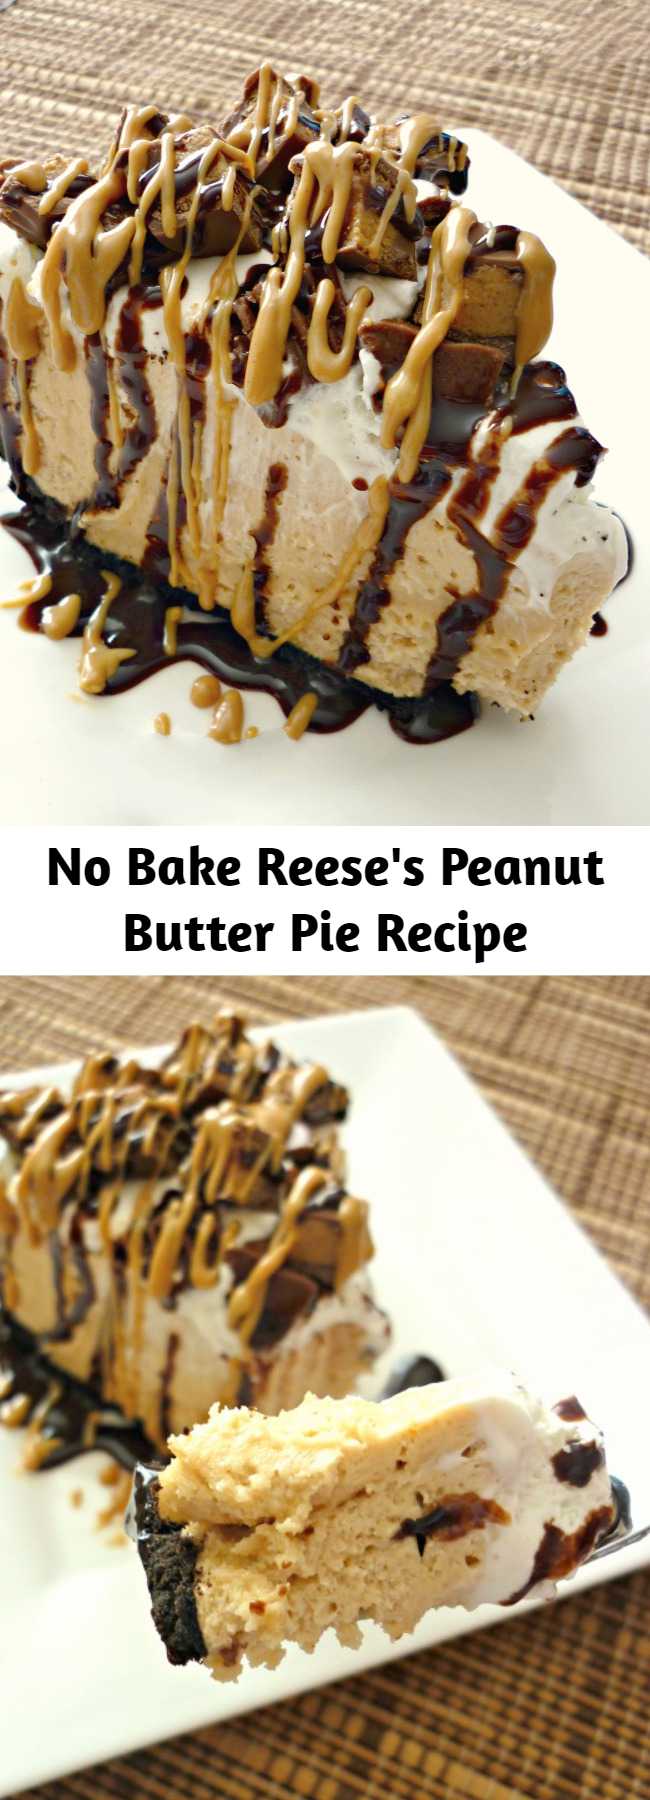 No Bake Reese's Peanut Butter Pie Recipe - This Reese’s Peanut Butter Pie is sure to knock your socks off. With a delicious no-bake peanut butter cheesecake filling and topped with Reese’s Miniatures, you can’t go wrong with this easy dessert.